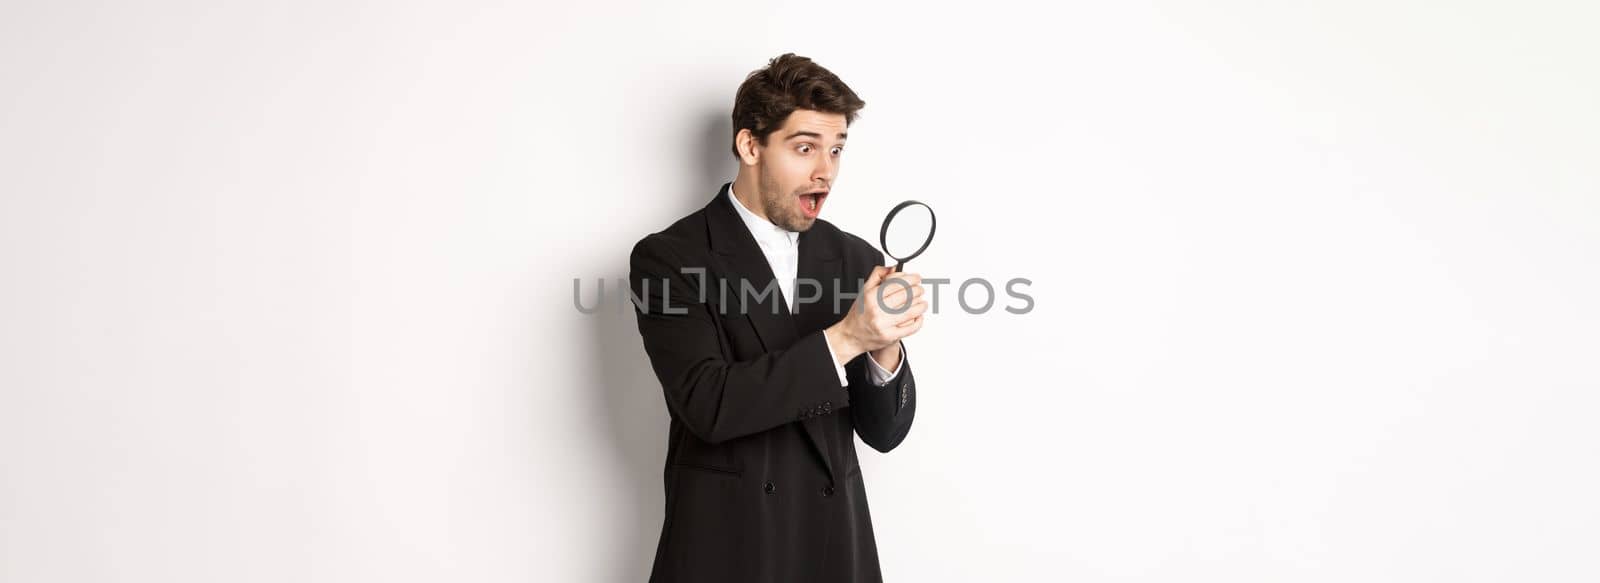 Handsome businessman in black suit, holding magnifying glass and smiling, found something, standing against white background.